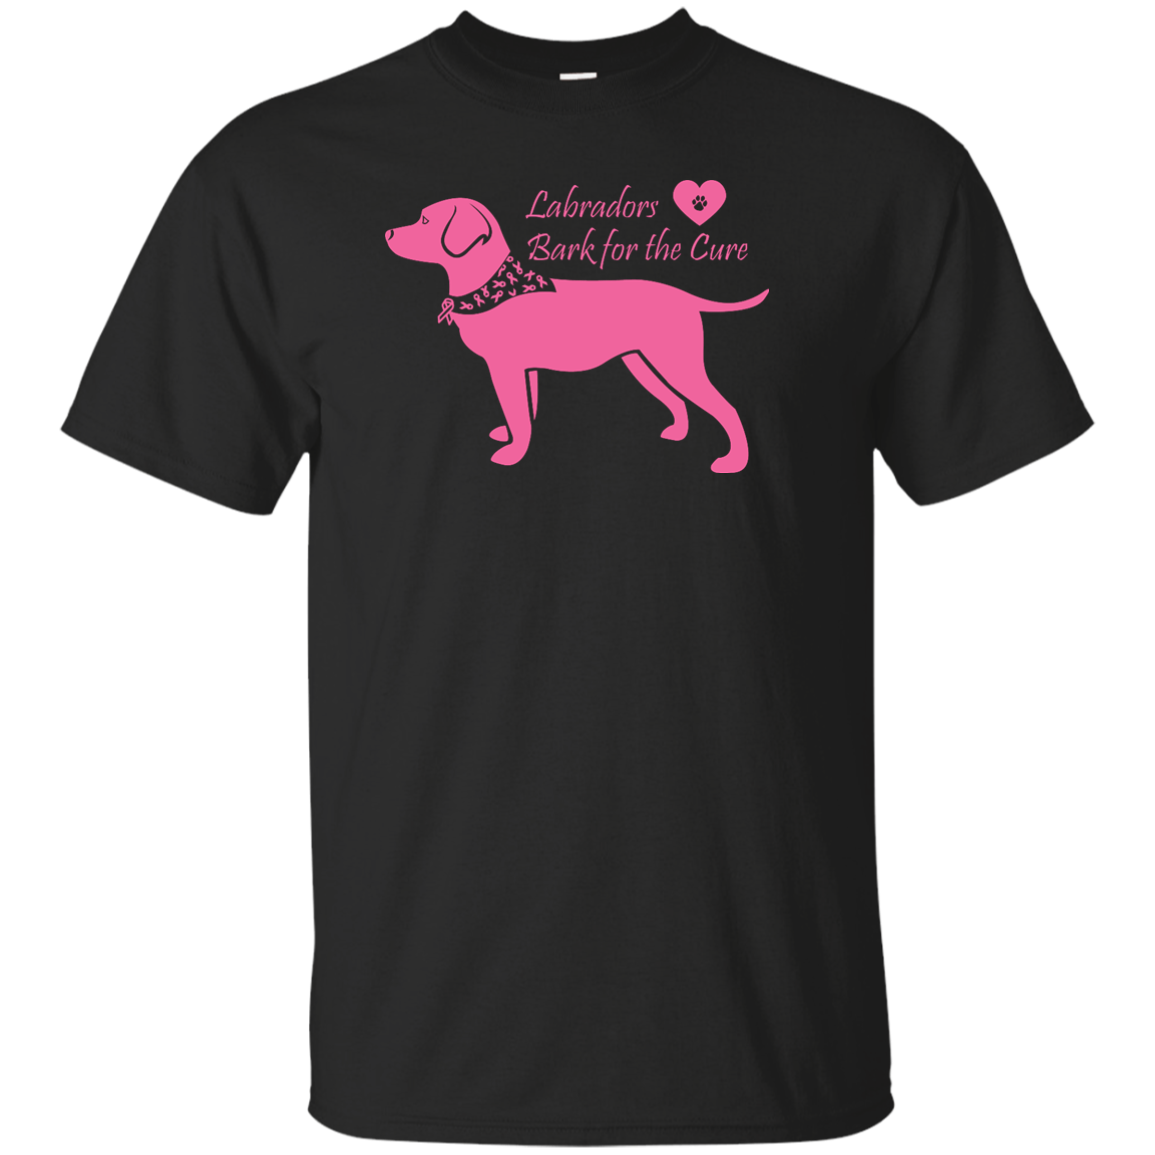 Labradors Bark for the Cure Shirts